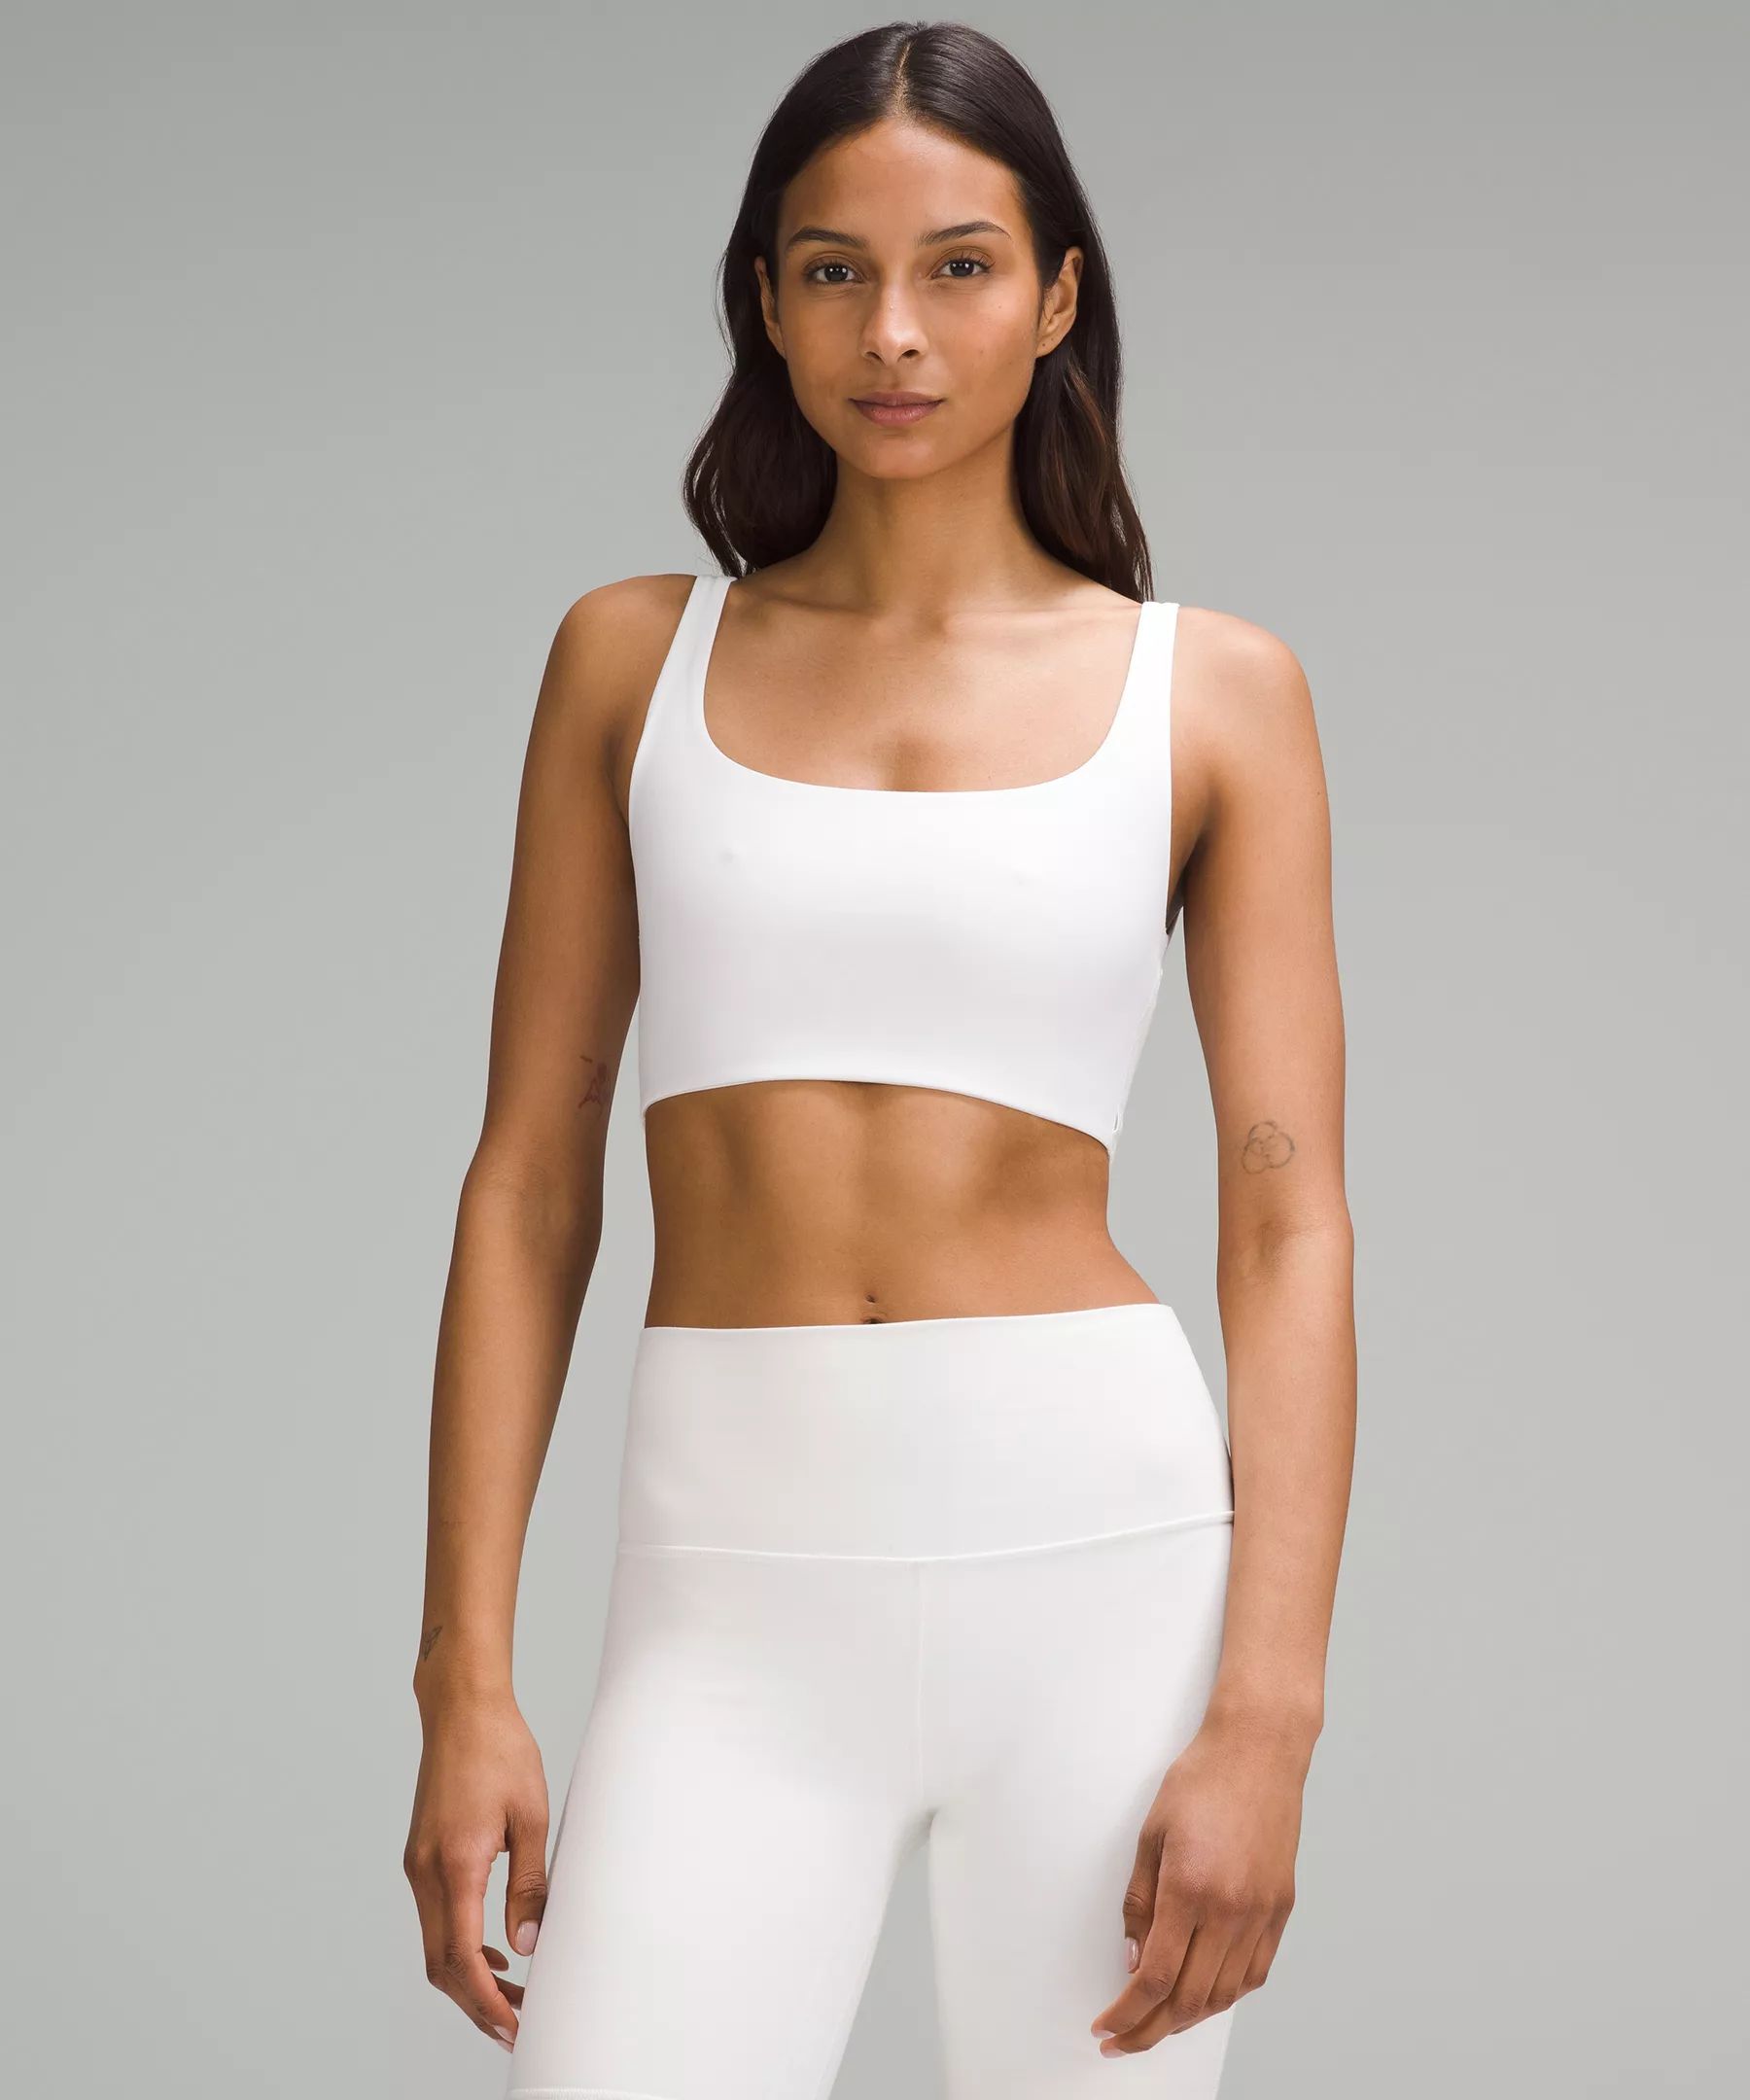 Bend This Scoop and Square Bra *Light Support, A-C Cups | Women's Bras | lululemon | Lululemon (US)